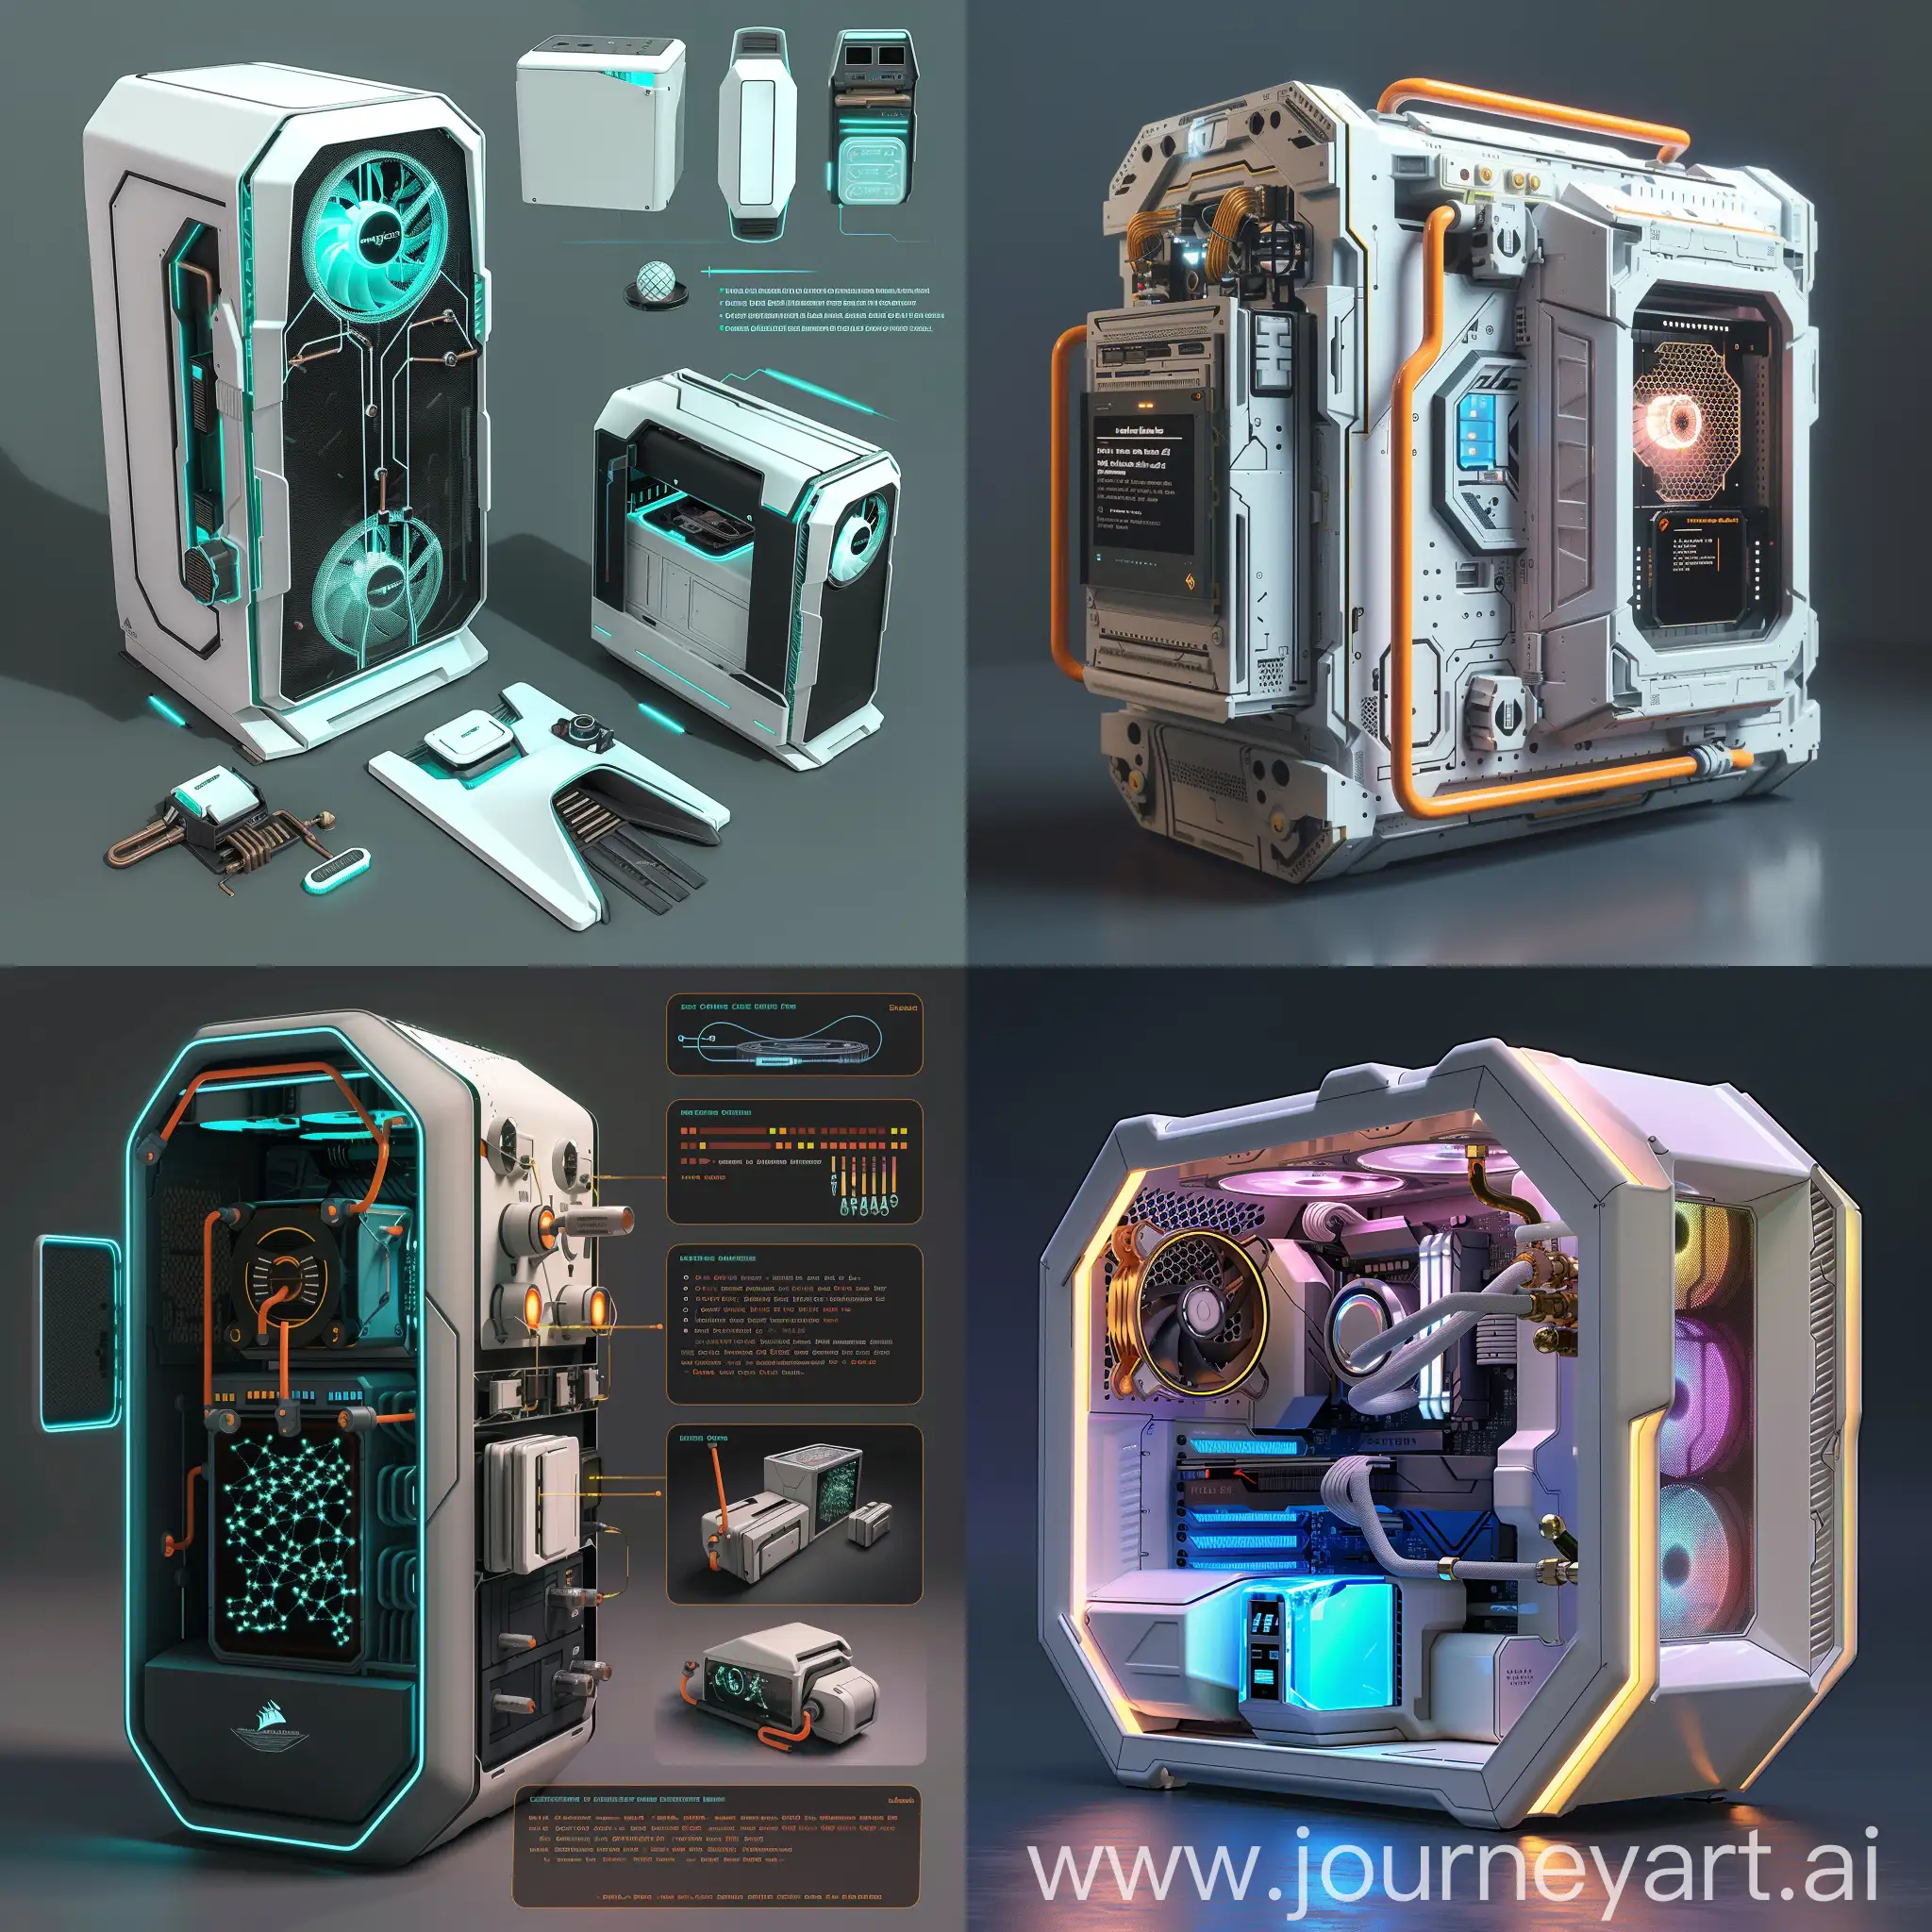 Futuristic PC case, Fractal Cooling (Inspired by "Primer"), Biometric Authentication Hatch (Inspired by "Ex Machina"), Modular "Nanite" Components (Inspired by "Micronauts"), Kinetic Energy Harvesting (Inspired by "Cloud Atlas"), Holographic Fan Display (Inspired by "Bladerunner 2049"), Organic LED Lighting (Inspired by "Annihilation"), Morphing Side Panels (Inspired by "Tensegrity"), AI-Controlled Maintenance System (Inspired by "Love, Death & Robots" - "Sonnie's Edge"), VR Headset Docking Station (Inspired by "Ready Player One"), Expandable Liquid Cooling Reservoir (Inspired by "The Expanse"), Fractal Fractal Network (Inspired by "Arrival"), Kinetic Energy Display (Inspired by "Minority Report"), Modular "Symbiotic" Components (Inspired by "Symbiont"), Self-Cleaning Antimicrobial Coating (Inspired by "Exogenesis"), Adaptive Temperature-Responding Panels (Inspired by "Solaris"), Organic LED "Synapse Flow" Lighting (Inspired by "Psycho-Pass"), Zero-Gravity Mounting System (Inspired by "Elysium"), AI-Powered "Hyperfocus" Mode (Inspired by "Lucy"), VR Headset Integration (Inspired by "The Peripheral"), Expandable Holographic Projection System (Inspired by "Strange Days"), unreal engine 5 --stylize 1000